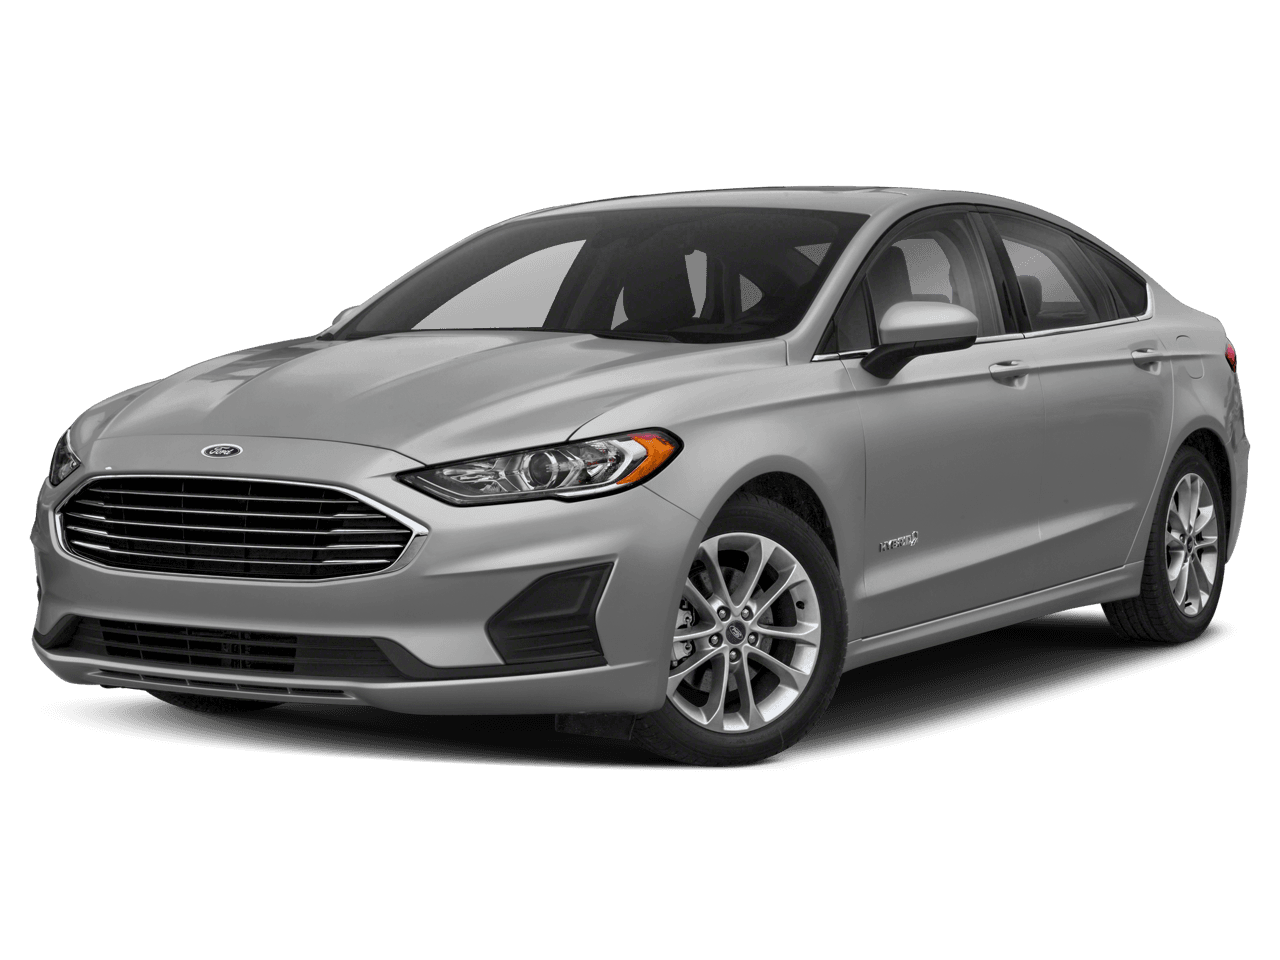 2019 Ford Fusion Hybrid Photo in Mount Vernon, OH 43050